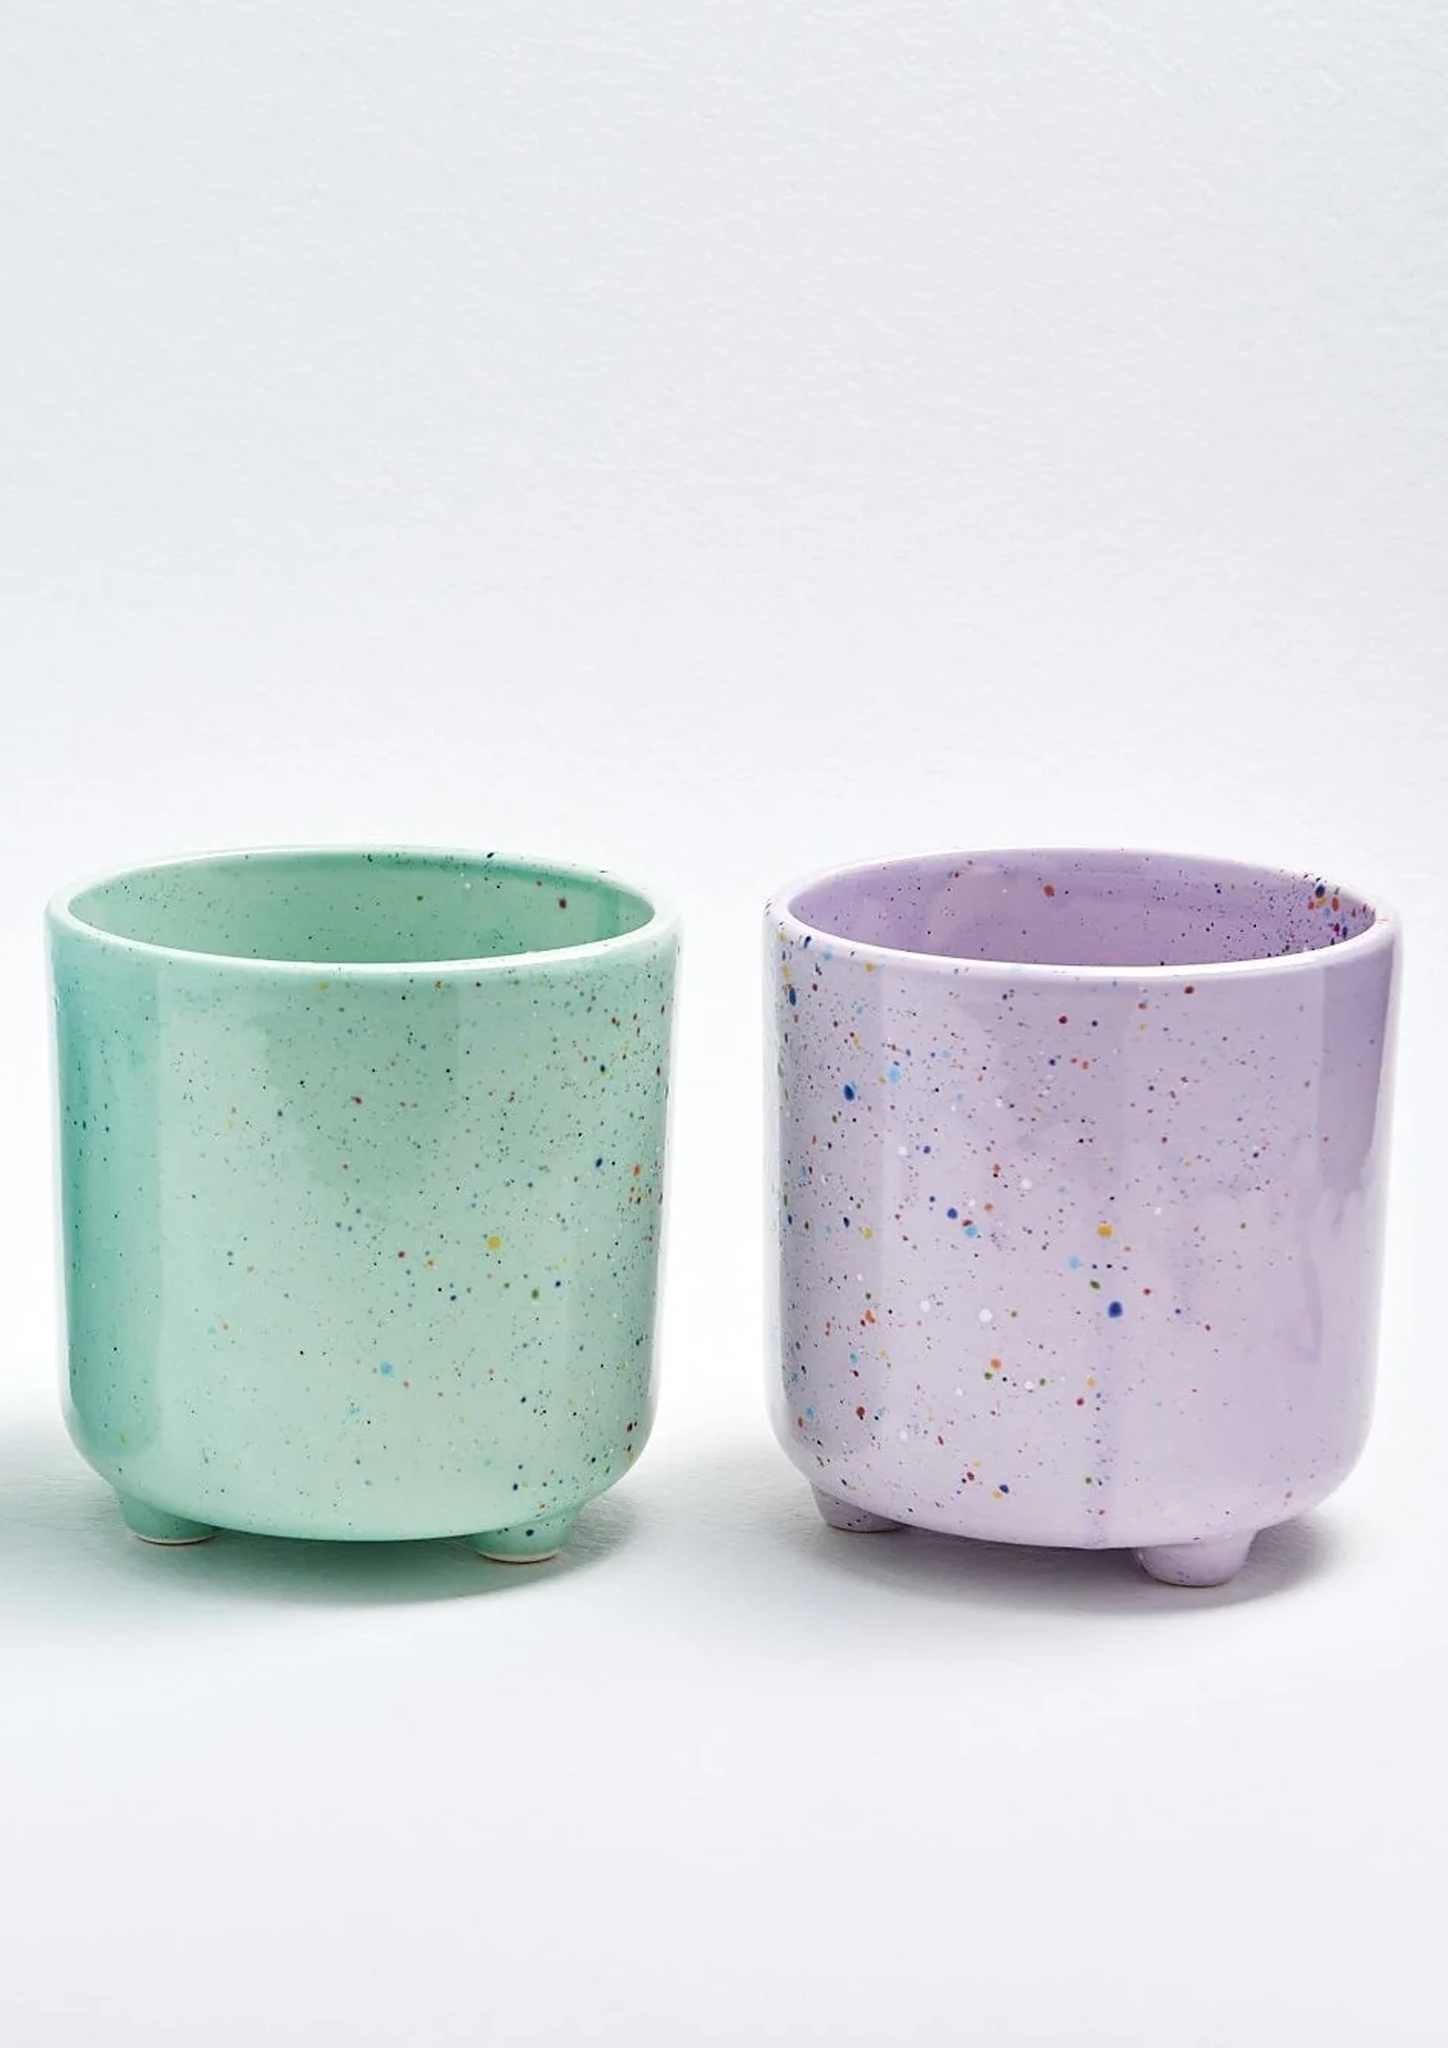 Large Confetti Party Handmade Planter - Various Colours